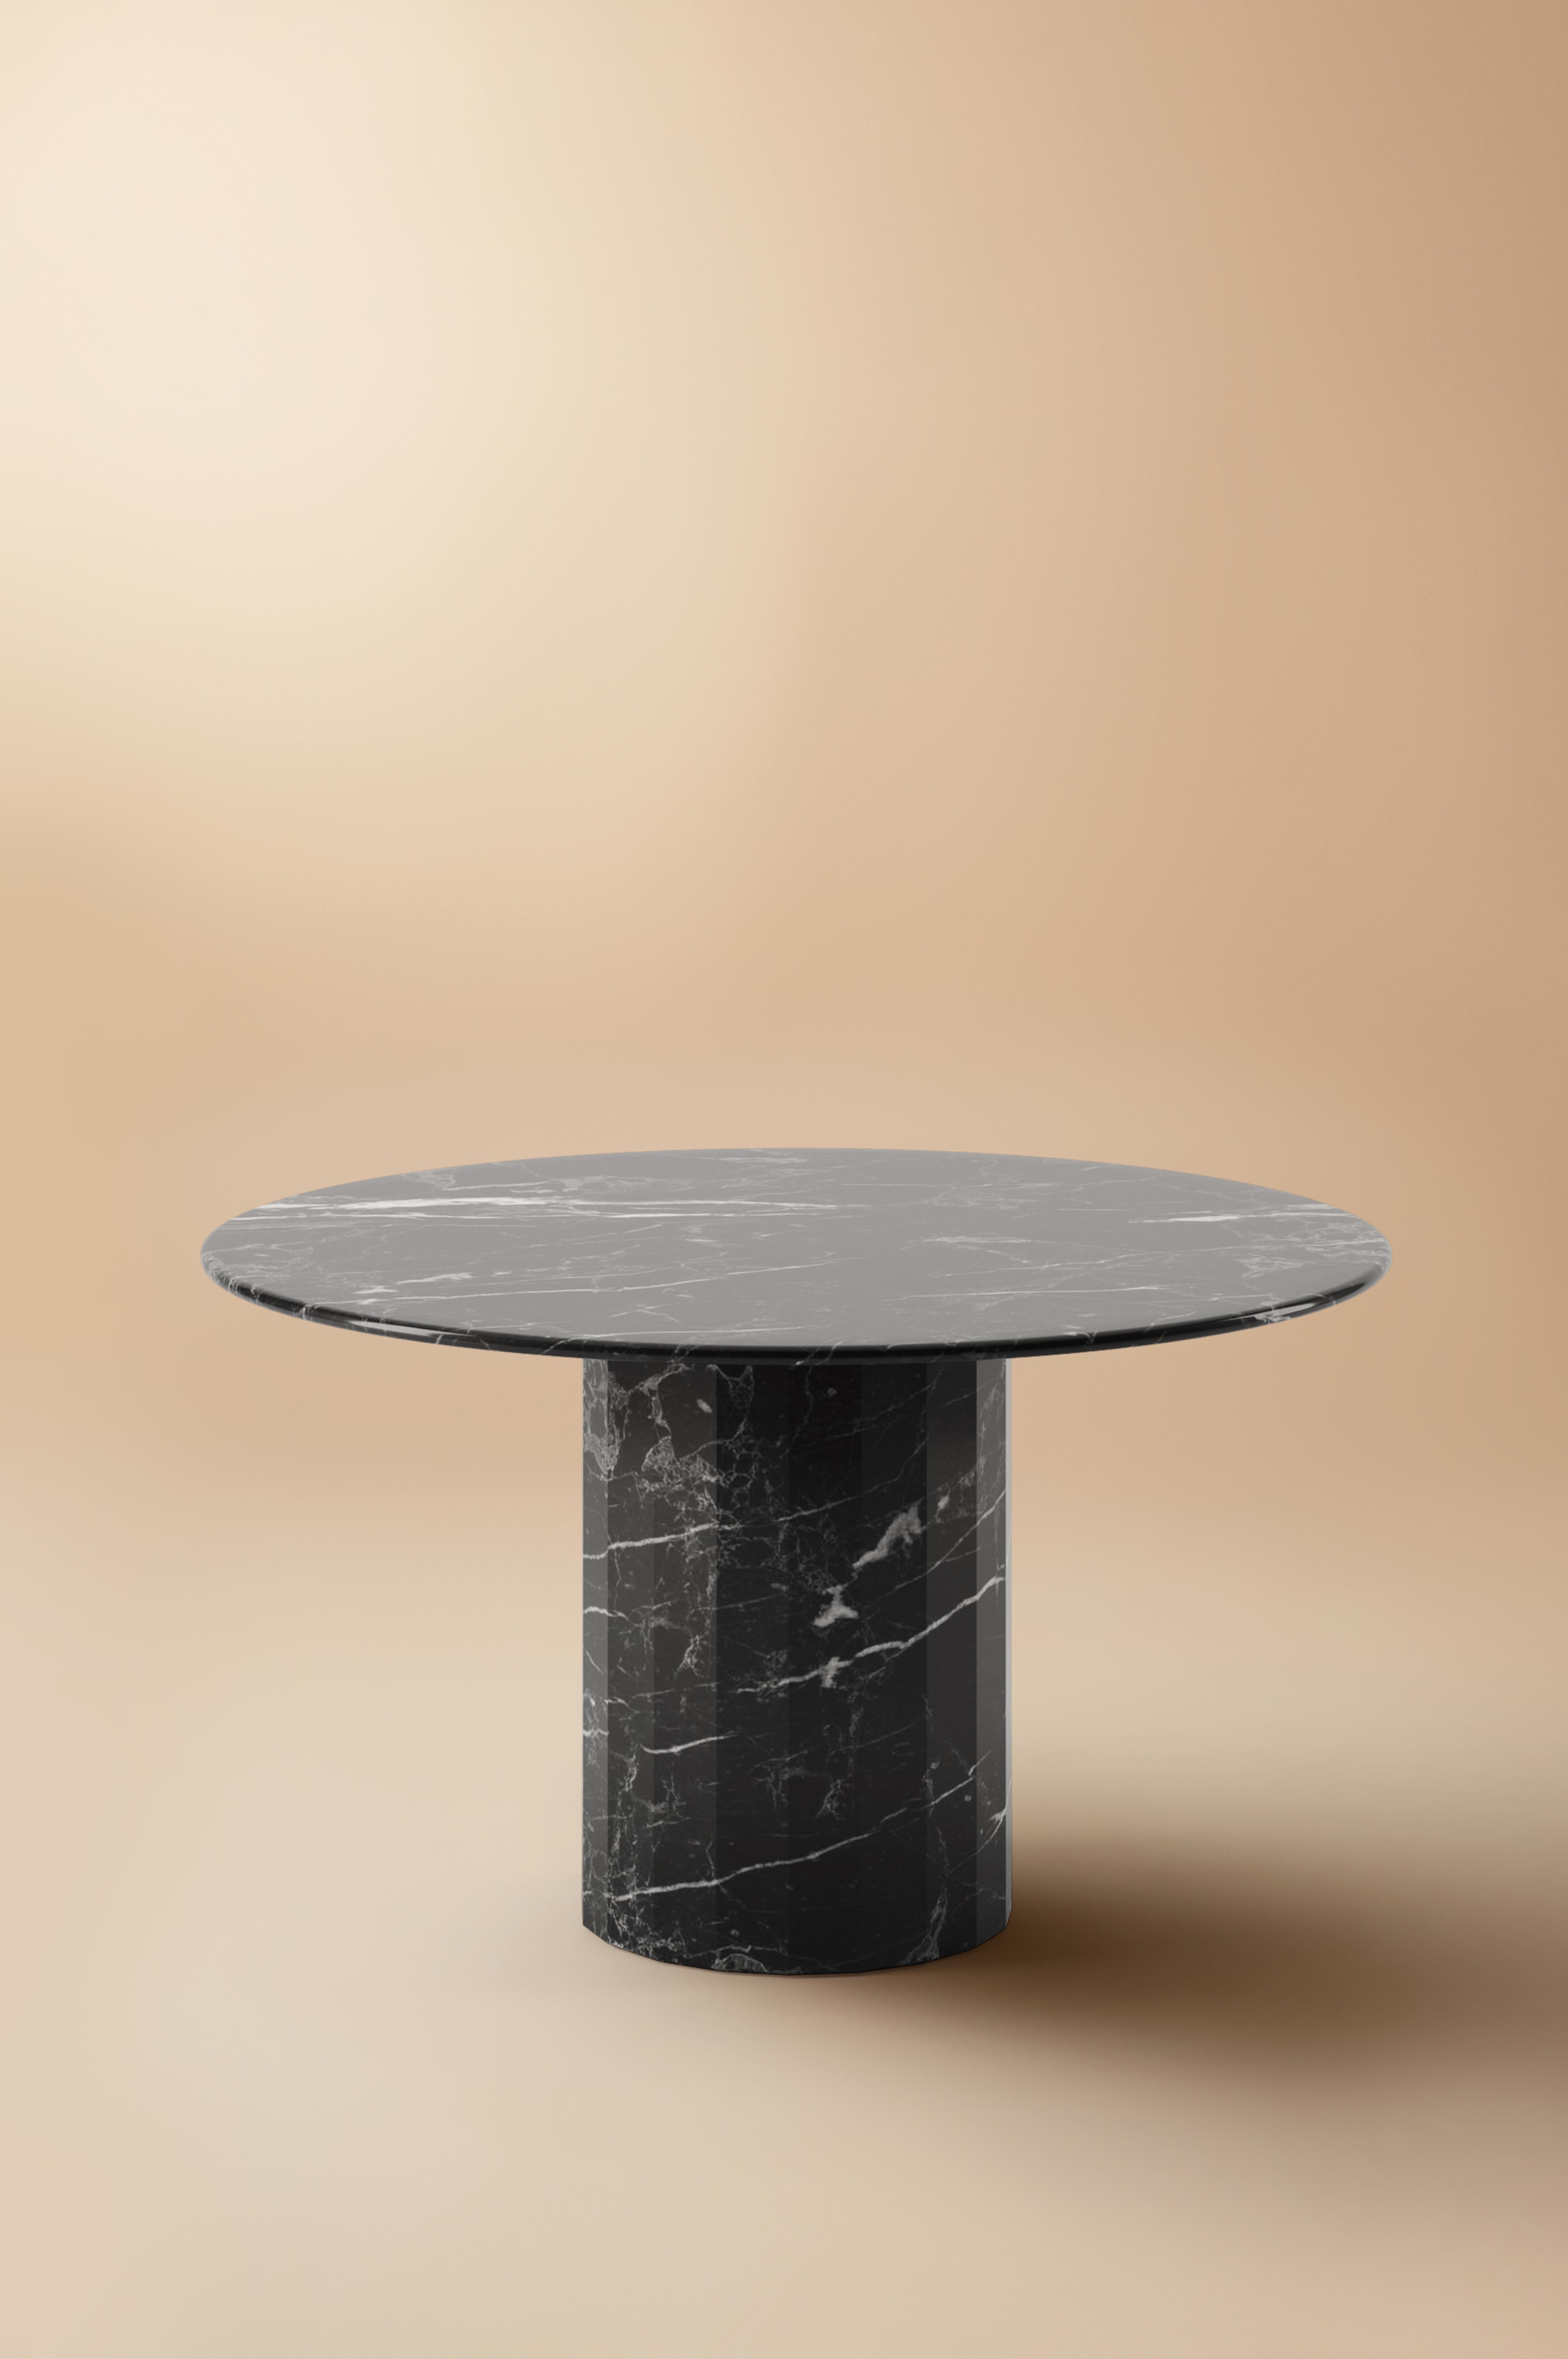 The Ashby marble round dining table is evidence of Lemon’s journey into increasing simplicity. With a design cued entirely by polished marble, its round slim top is countered by a strong faceted base – an intentional and definitive design detail.